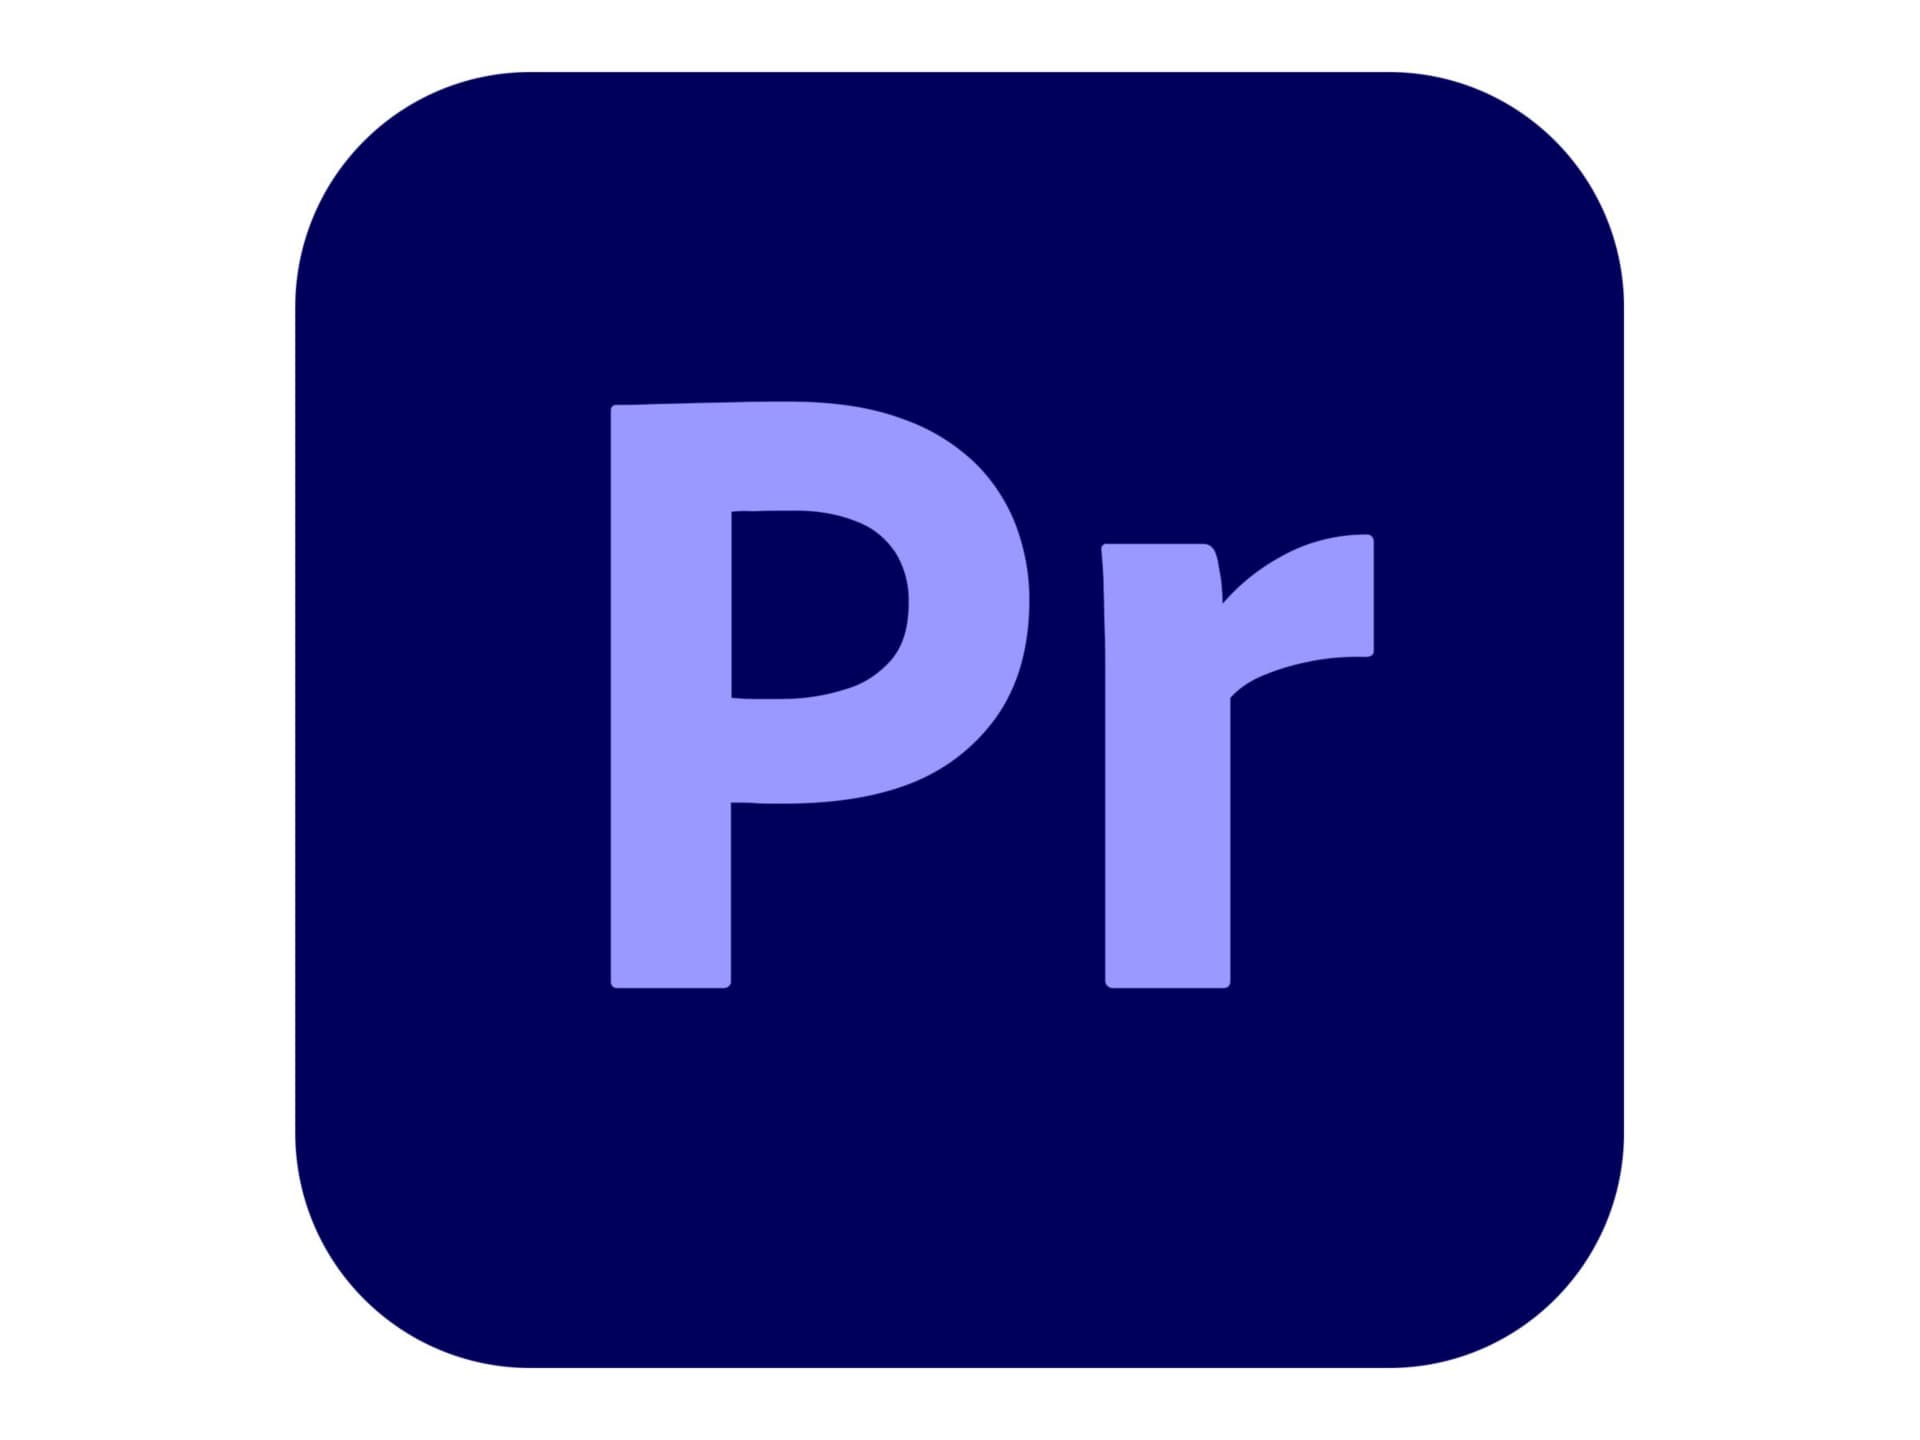 Adobe Premiere Pro CC for teams - Subscription New (4 years) - 1 named user